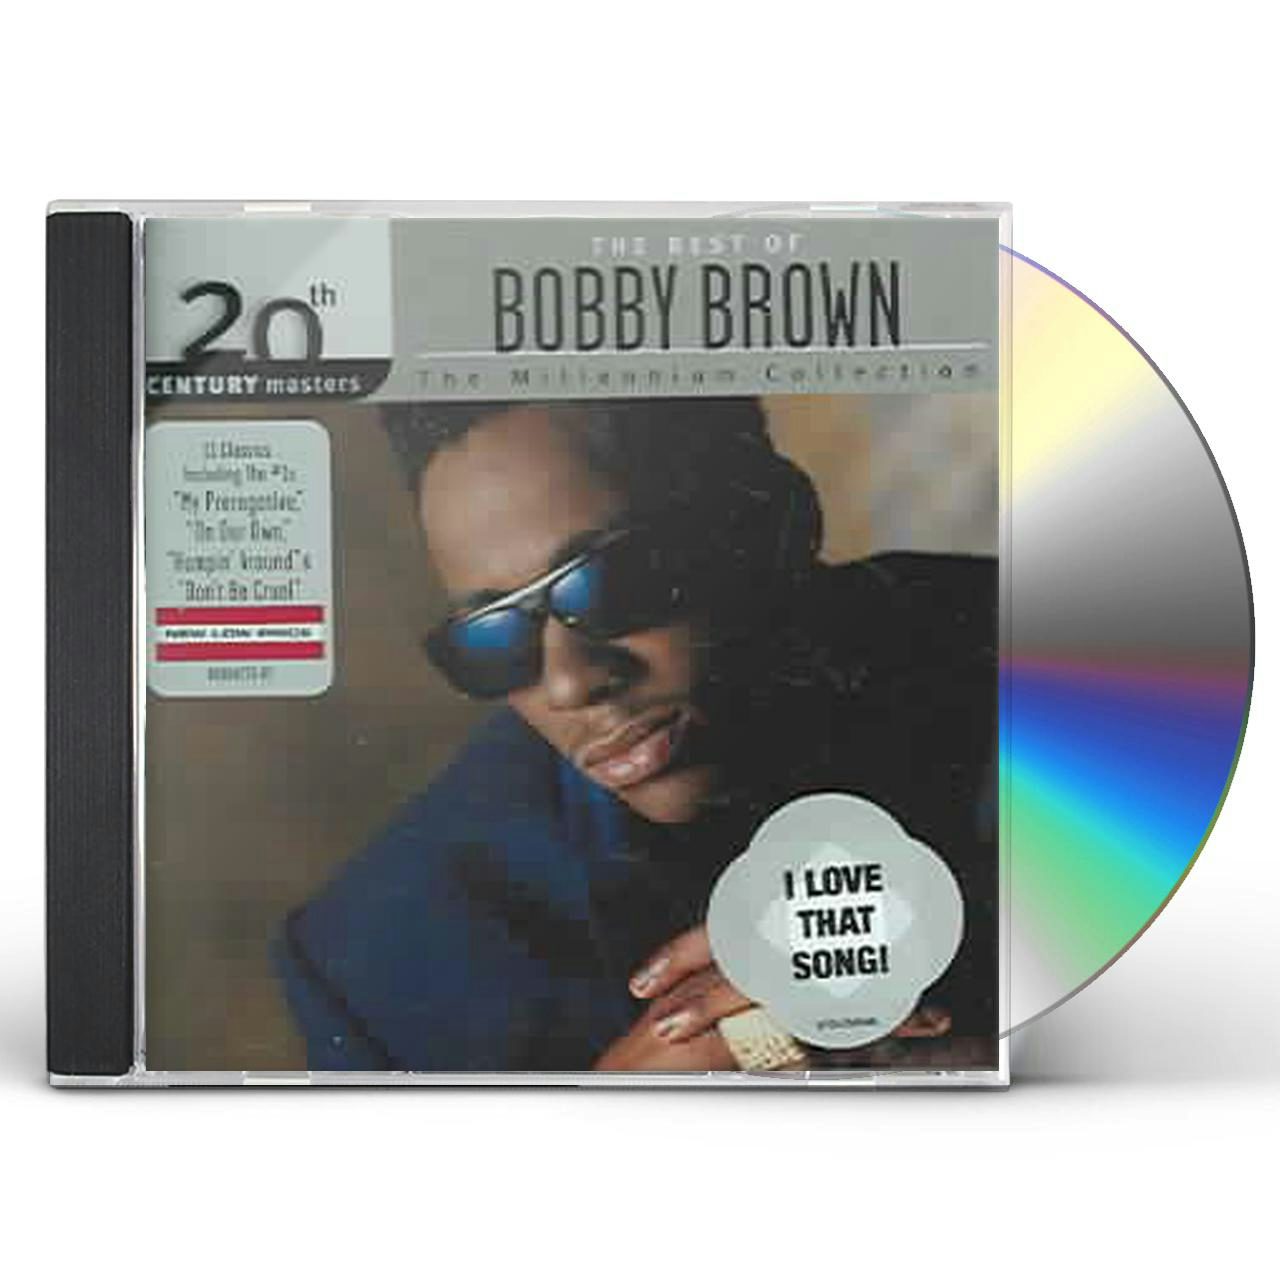 Bobby Brown 20TH CENTURY MASTERS: MILLENNIUM COLLECTION CD